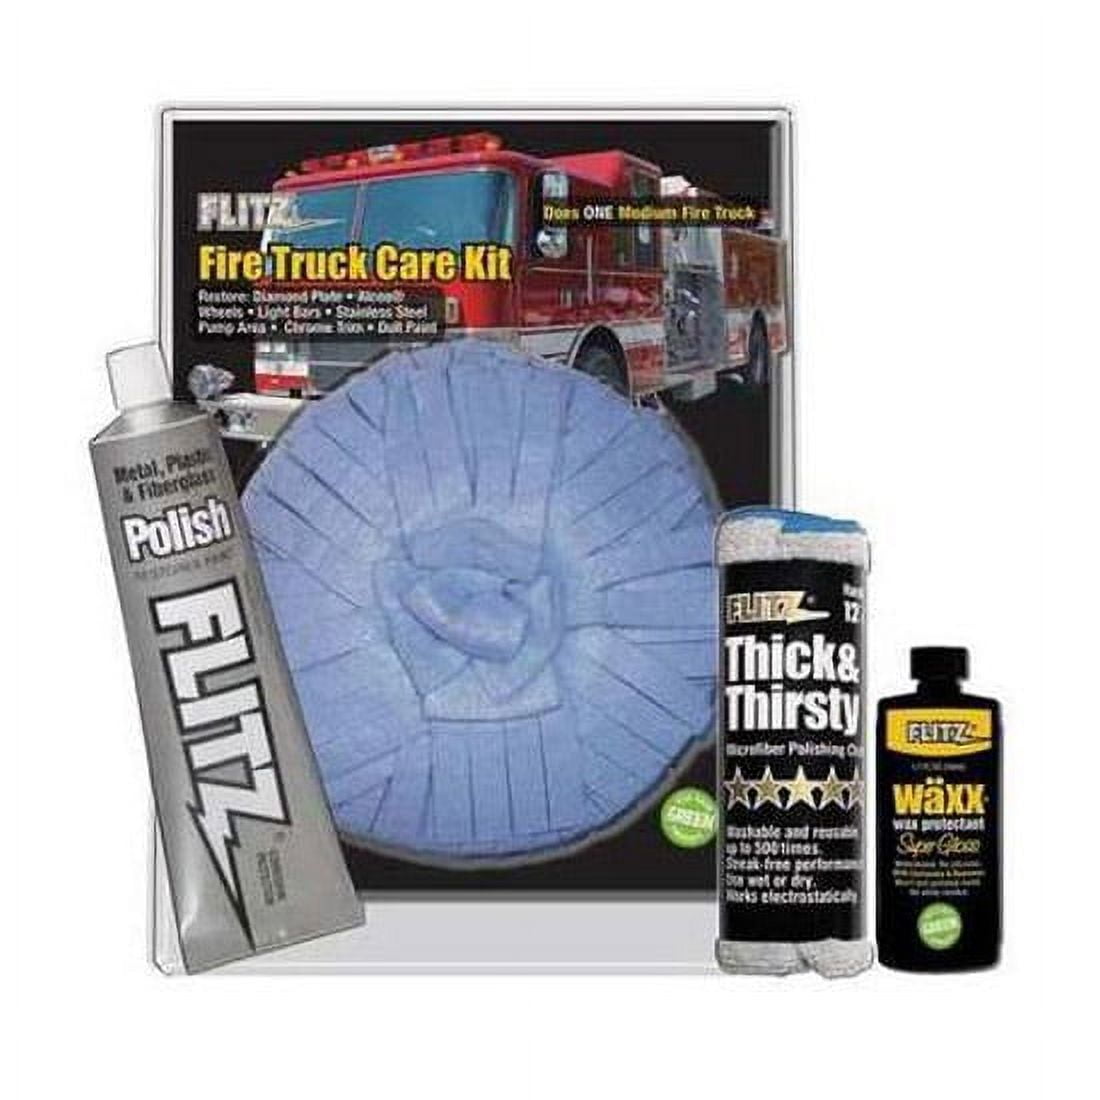 Flitz CY61501 Motorcycle Detailing Kit for sale online